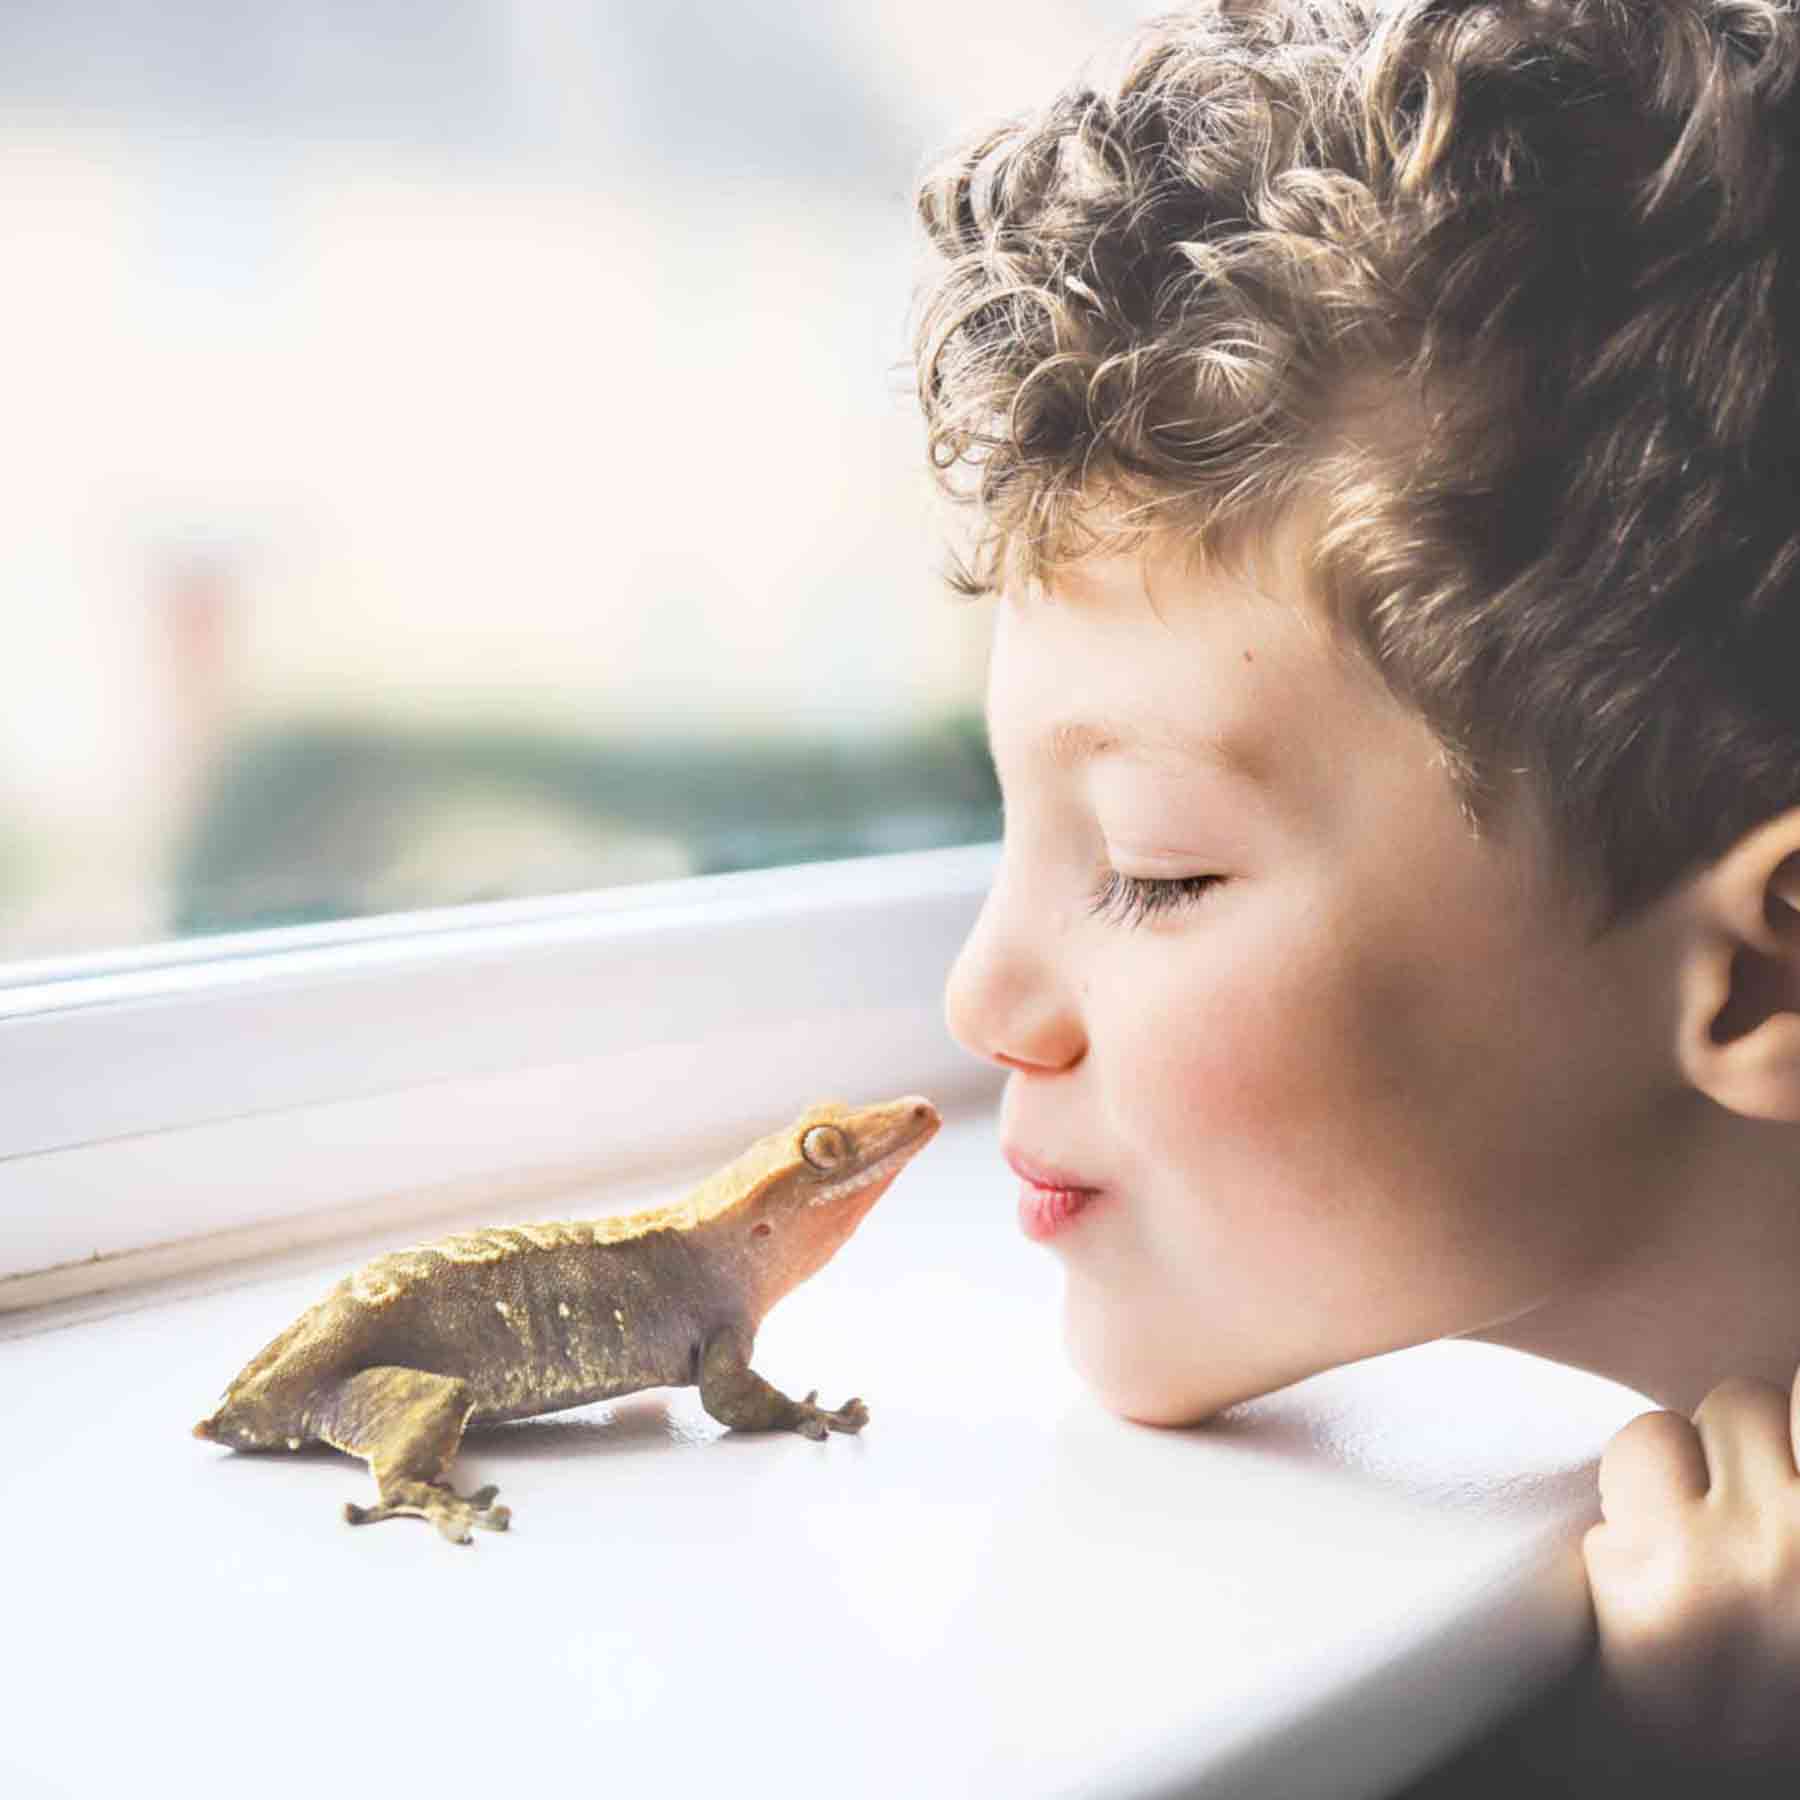 young-boy-looking-closely-at-his-amphibian-on-a-windowsill-while-his-mom-cleans-the-reptiles-terrarium